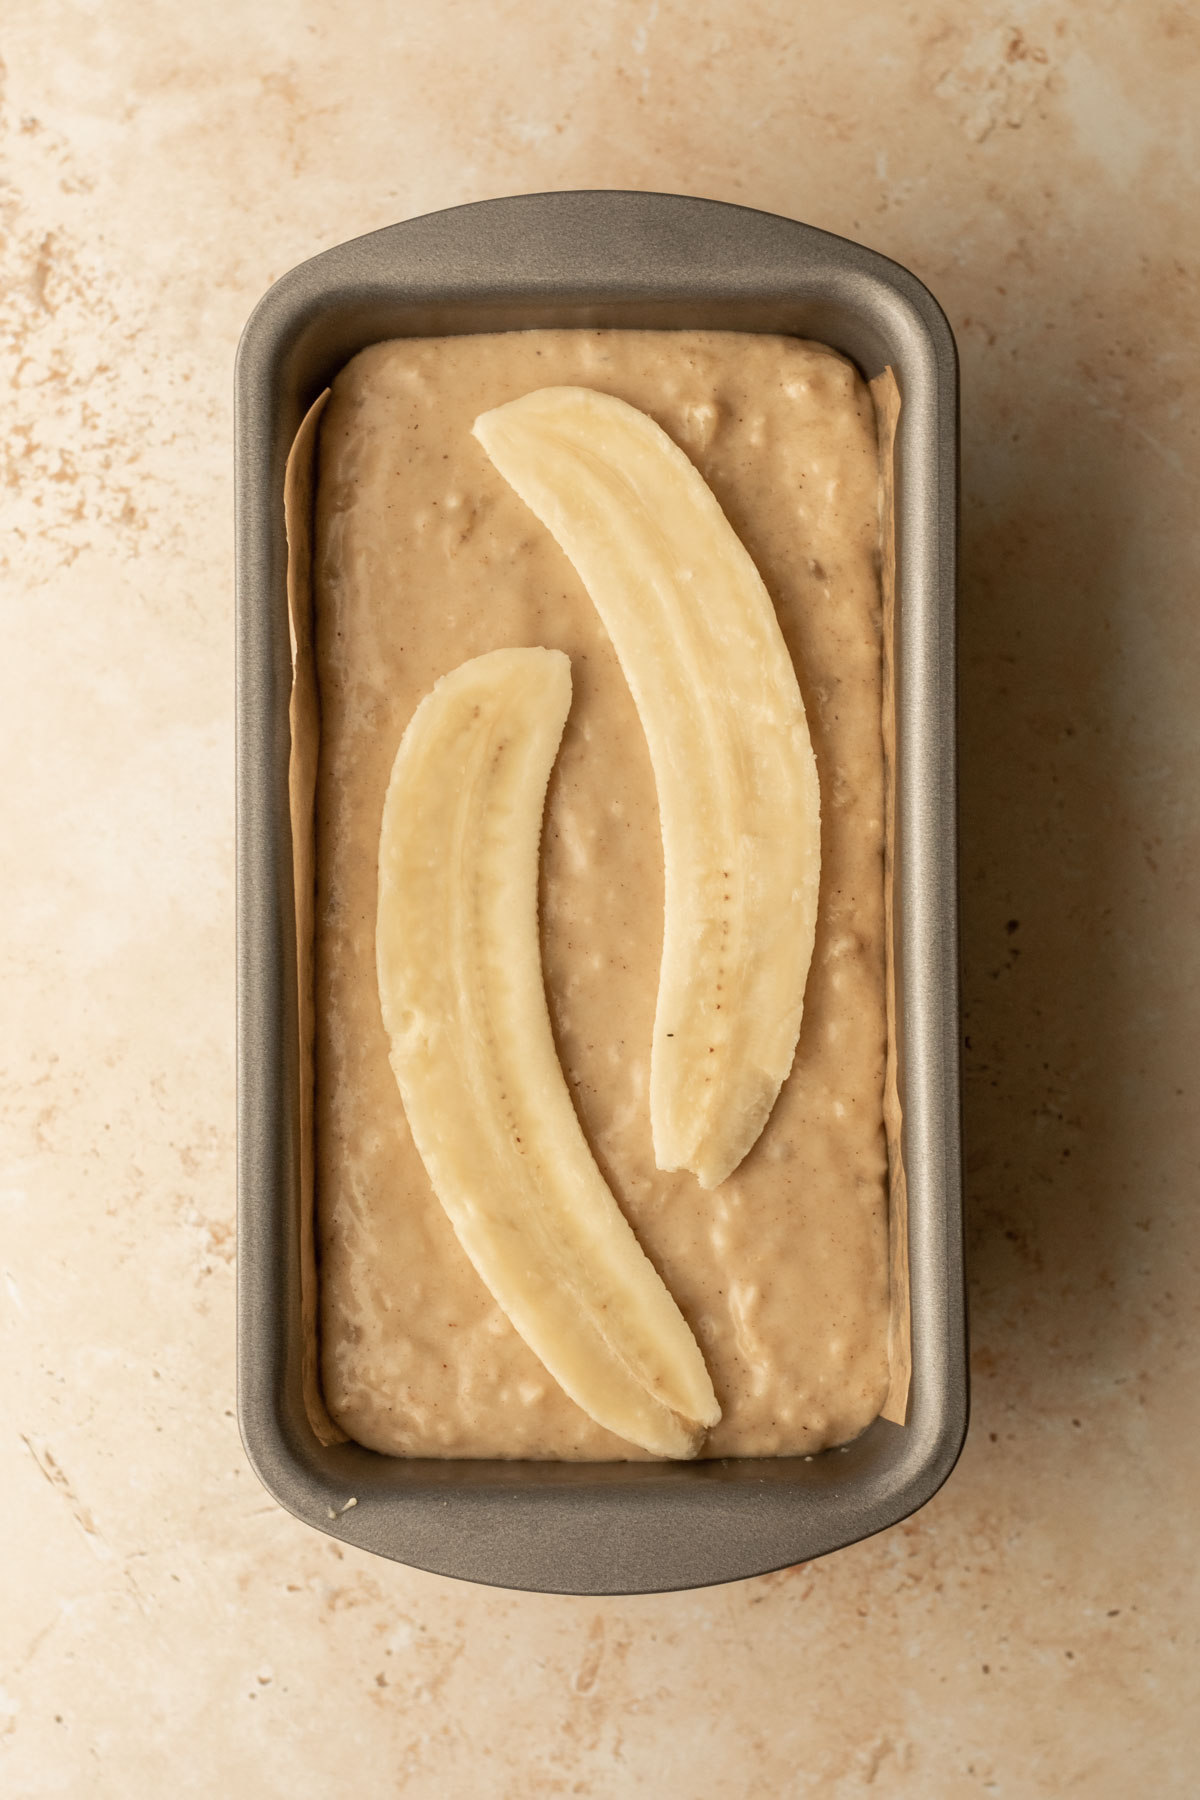 chai banana bread ready to be baked in the oven